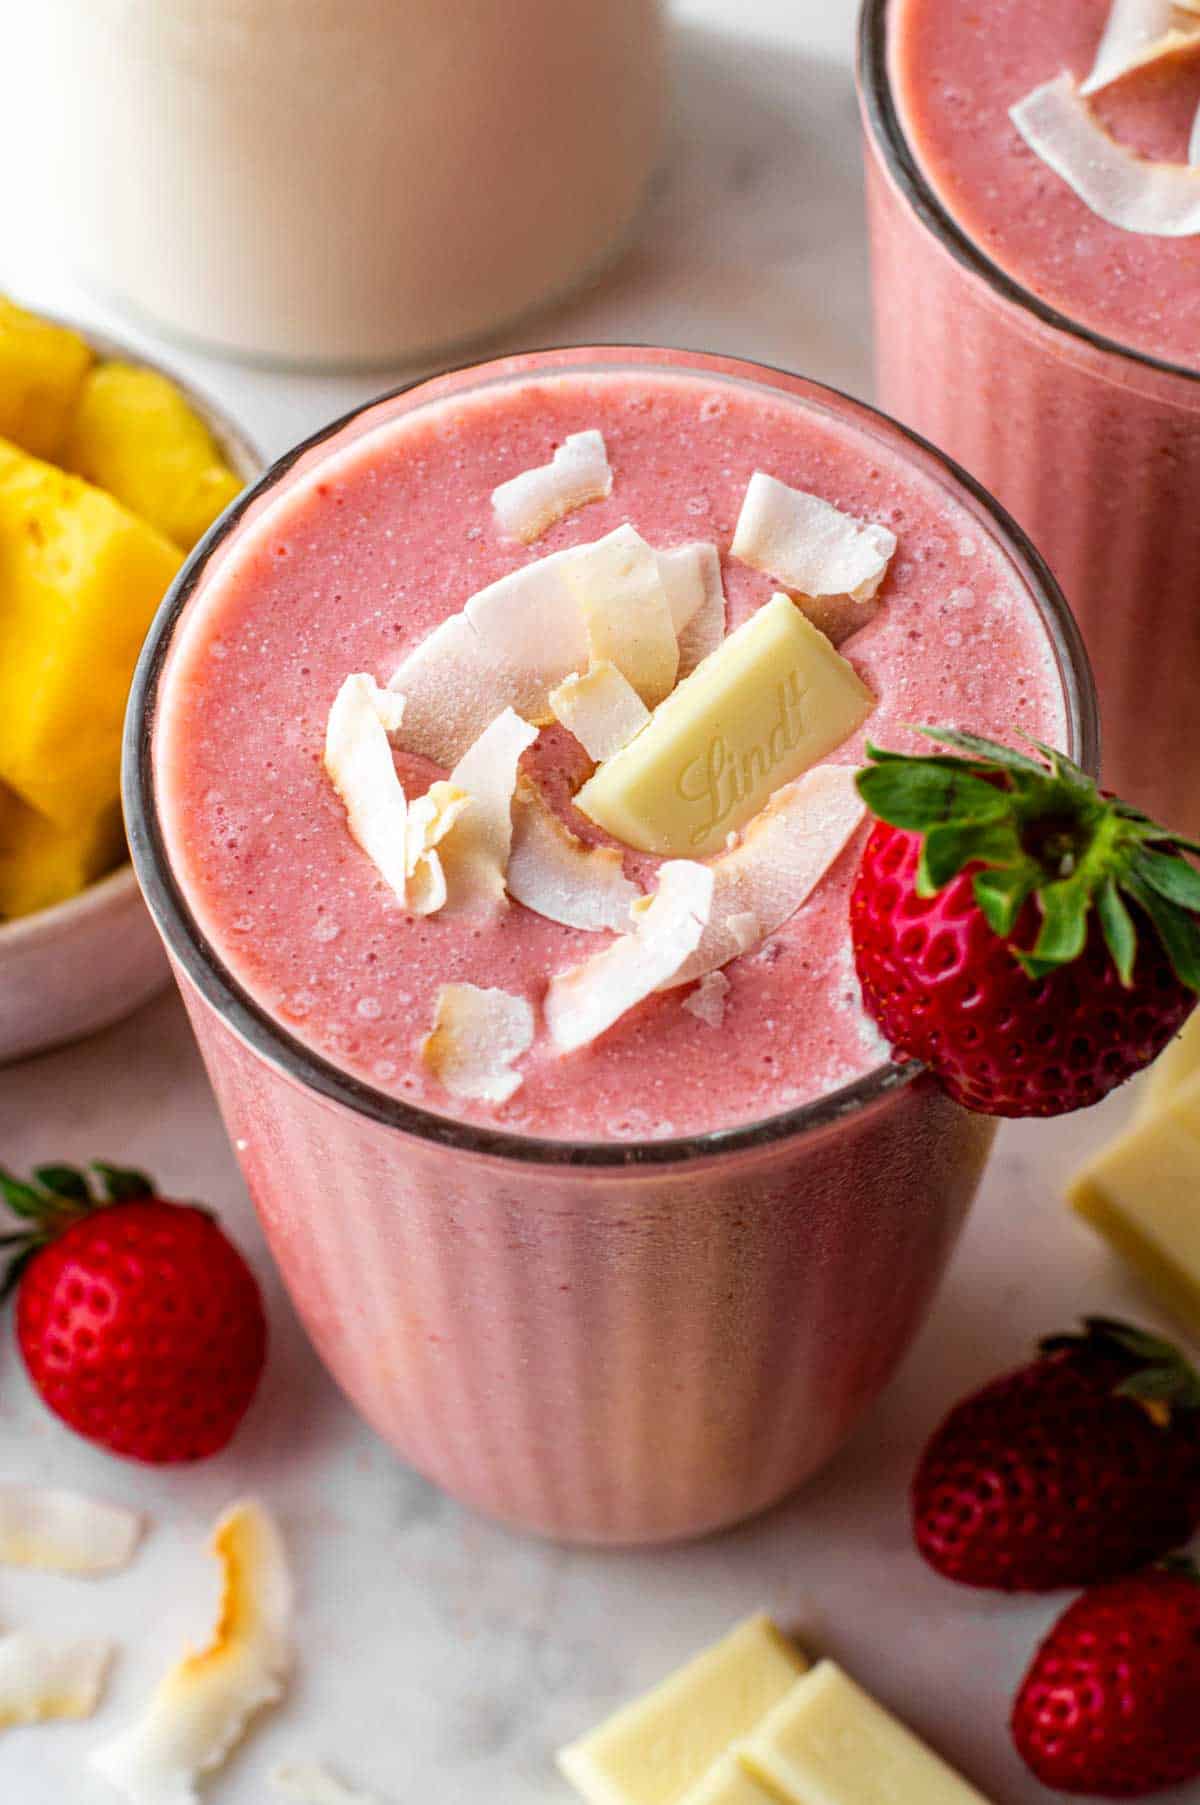 Strawberry smoothie served in a glass jar and topped with coconut, white chocolate and a strawberry.